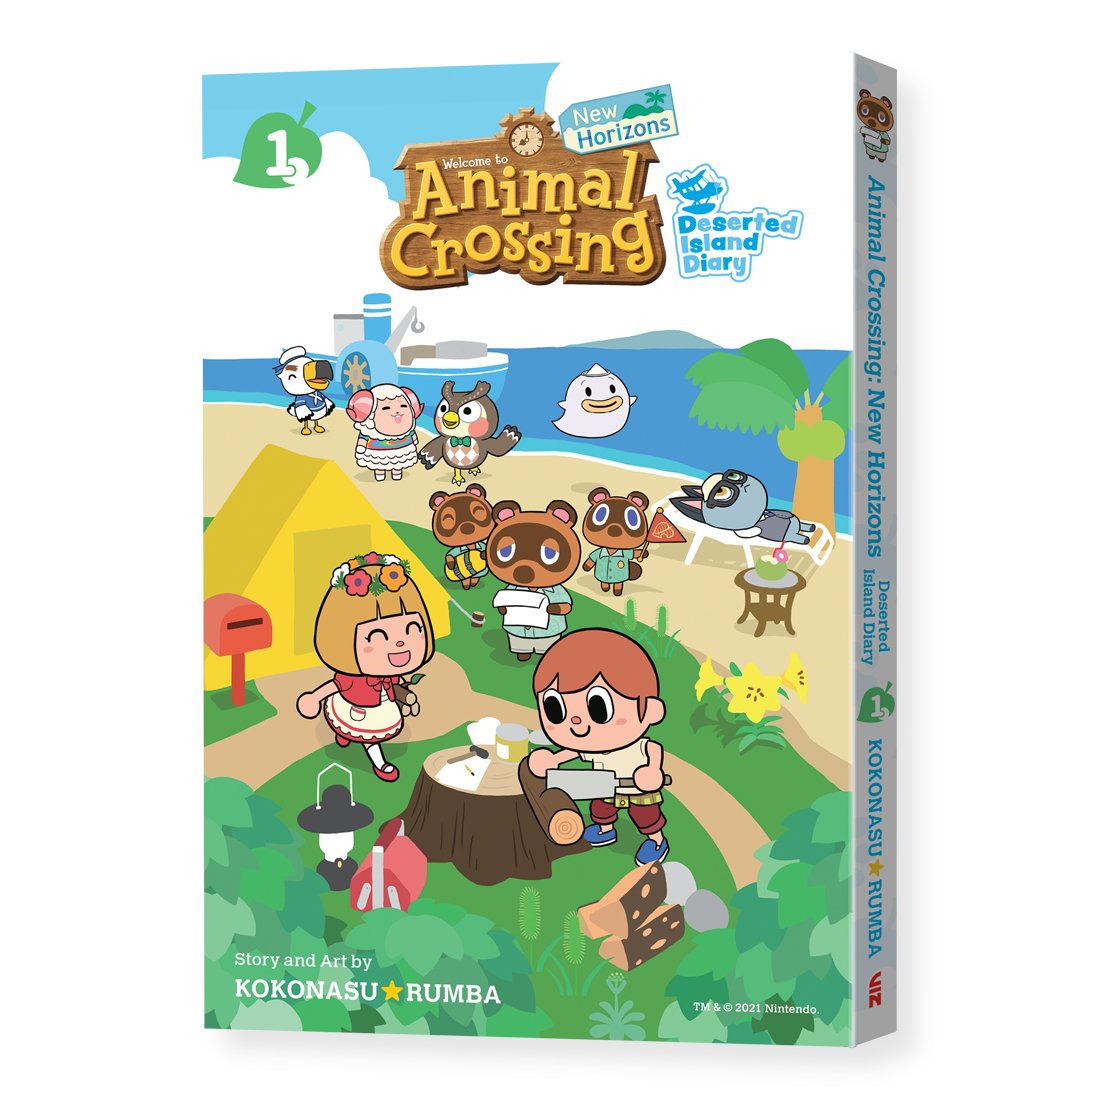 Animal Crossing: New Horizons Deserted Island Diary Vol. 1 cover, release  date